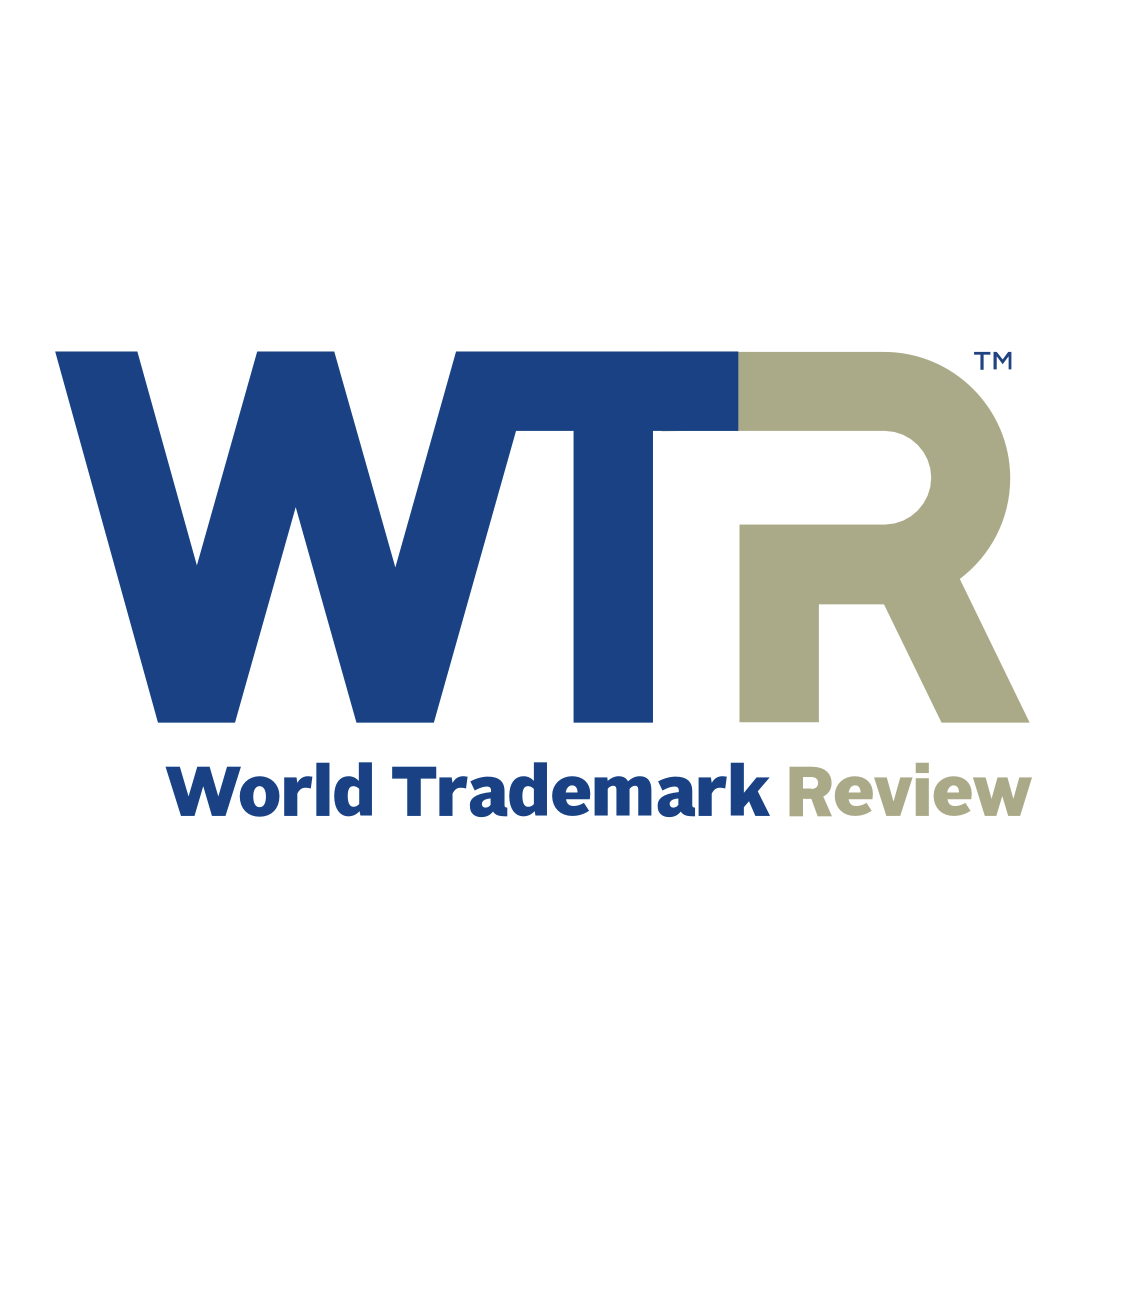 Aequo Once Again Named Among Gold League Trademark Firms in Ukraine According to WTR 1000 2020